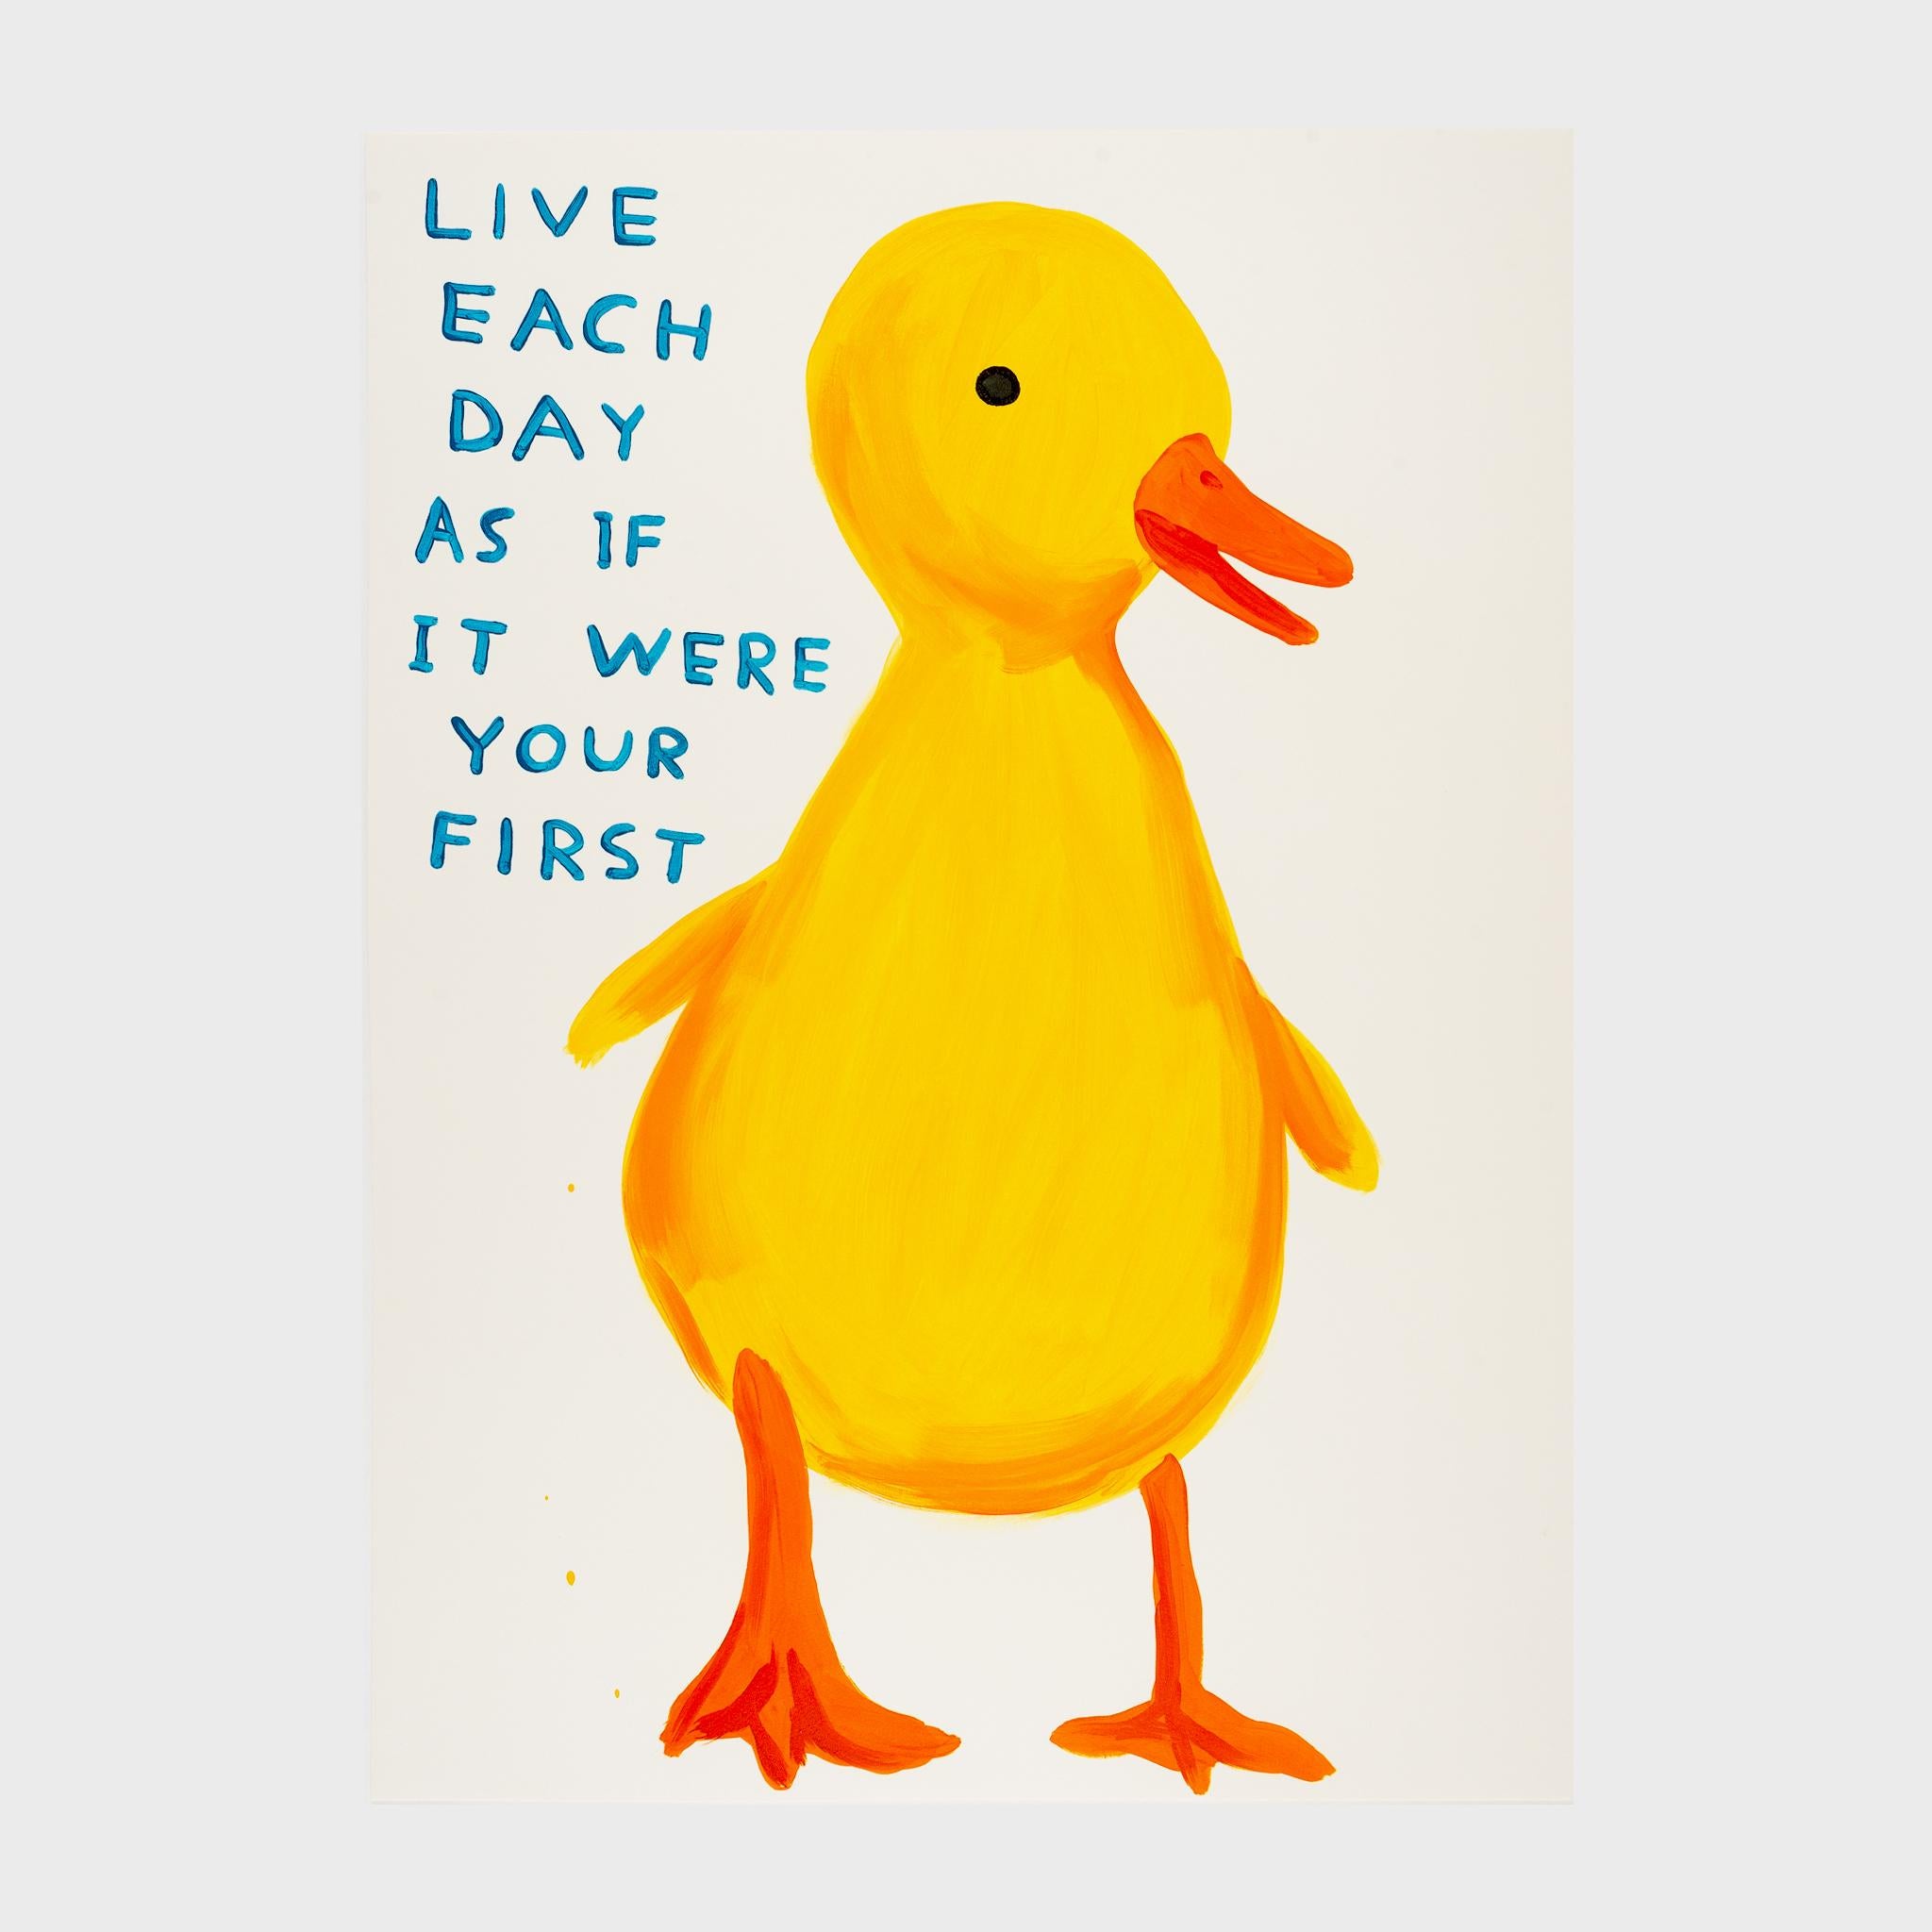 Live Each Day As If It Were Your First - Print by David Shrigley